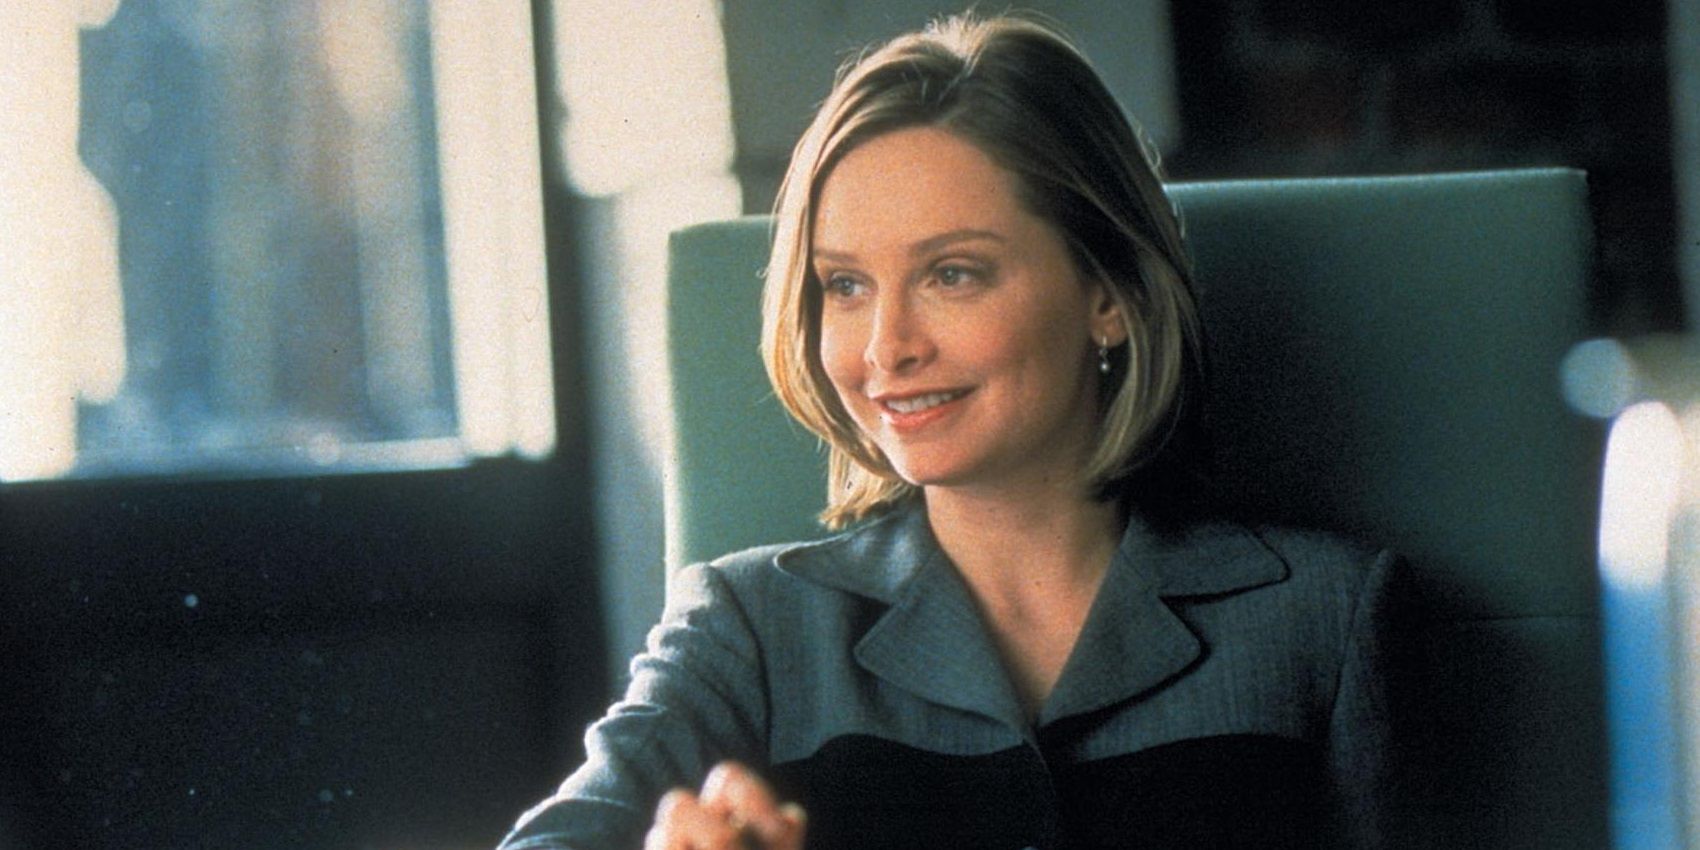 Calista Flockhart smiling in Ally McBeal